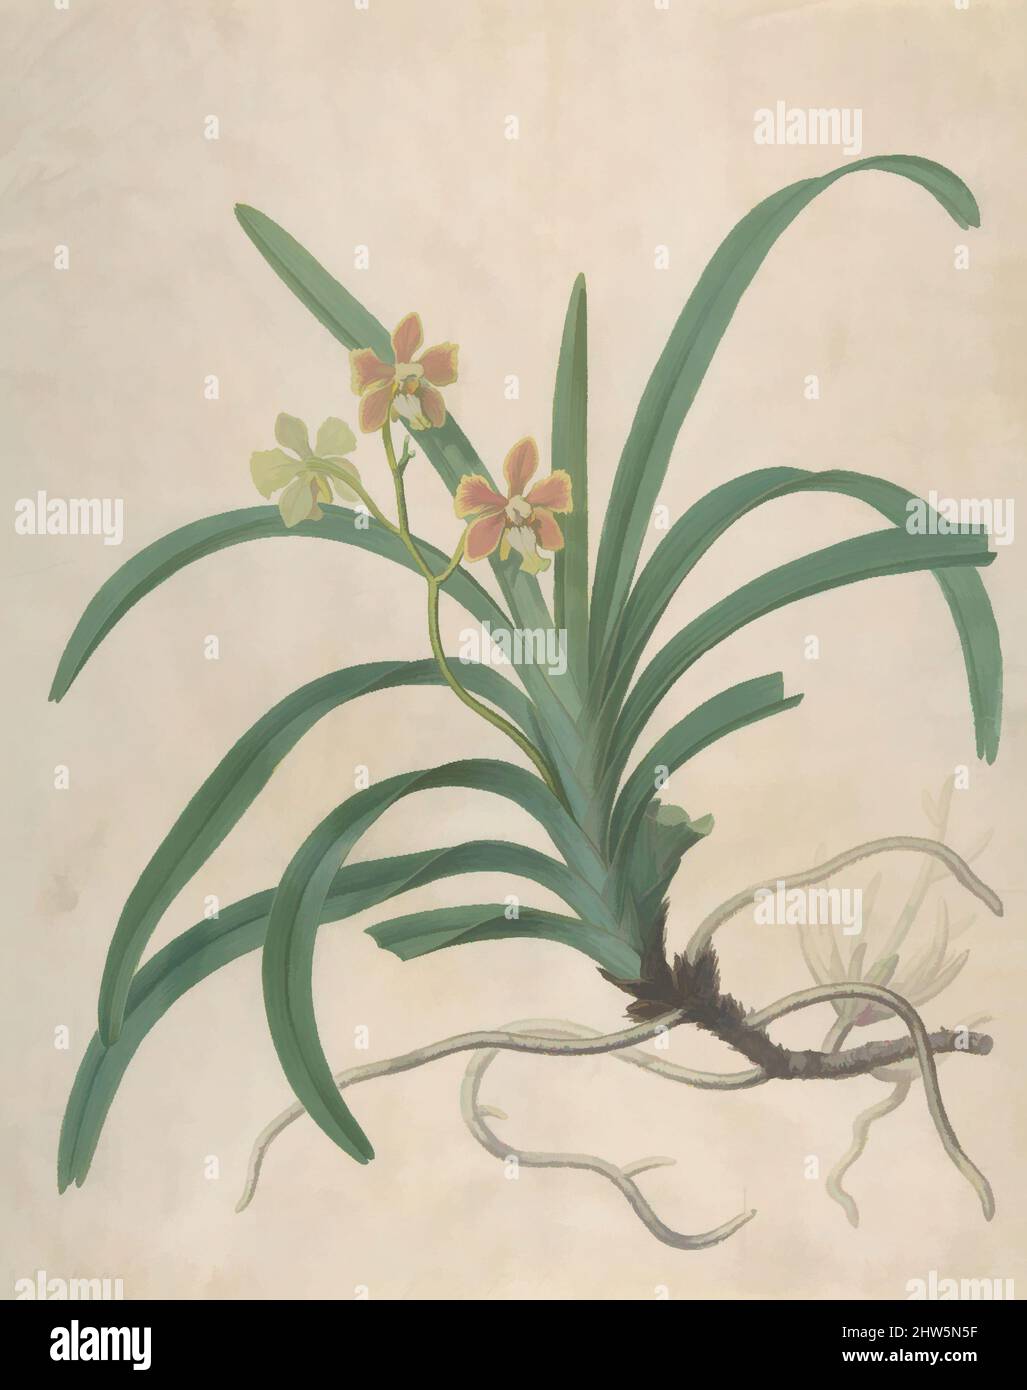 Art inspired by Study of an Orchid, 'Vanda Roxburgia', before 1822, Watercolor and gouache over graphite on white parchment paper, Sheet: 16 1/2 x 13 1/4 in. (41.9 x 33.6 cm), Drawings, James Sowerby (British, London 1757–1822 London), The Sowerbys were an English family of naturalists, Classic works modernized by Artotop with a splash of modernity. Shapes, color and value, eye-catching visual impact on art. Emotions through freedom of artworks in a contemporary way. A timeless message pursuing a wildly creative new direction. Artists turning to the digital medium and creating the Artotop NFT Stock Photo